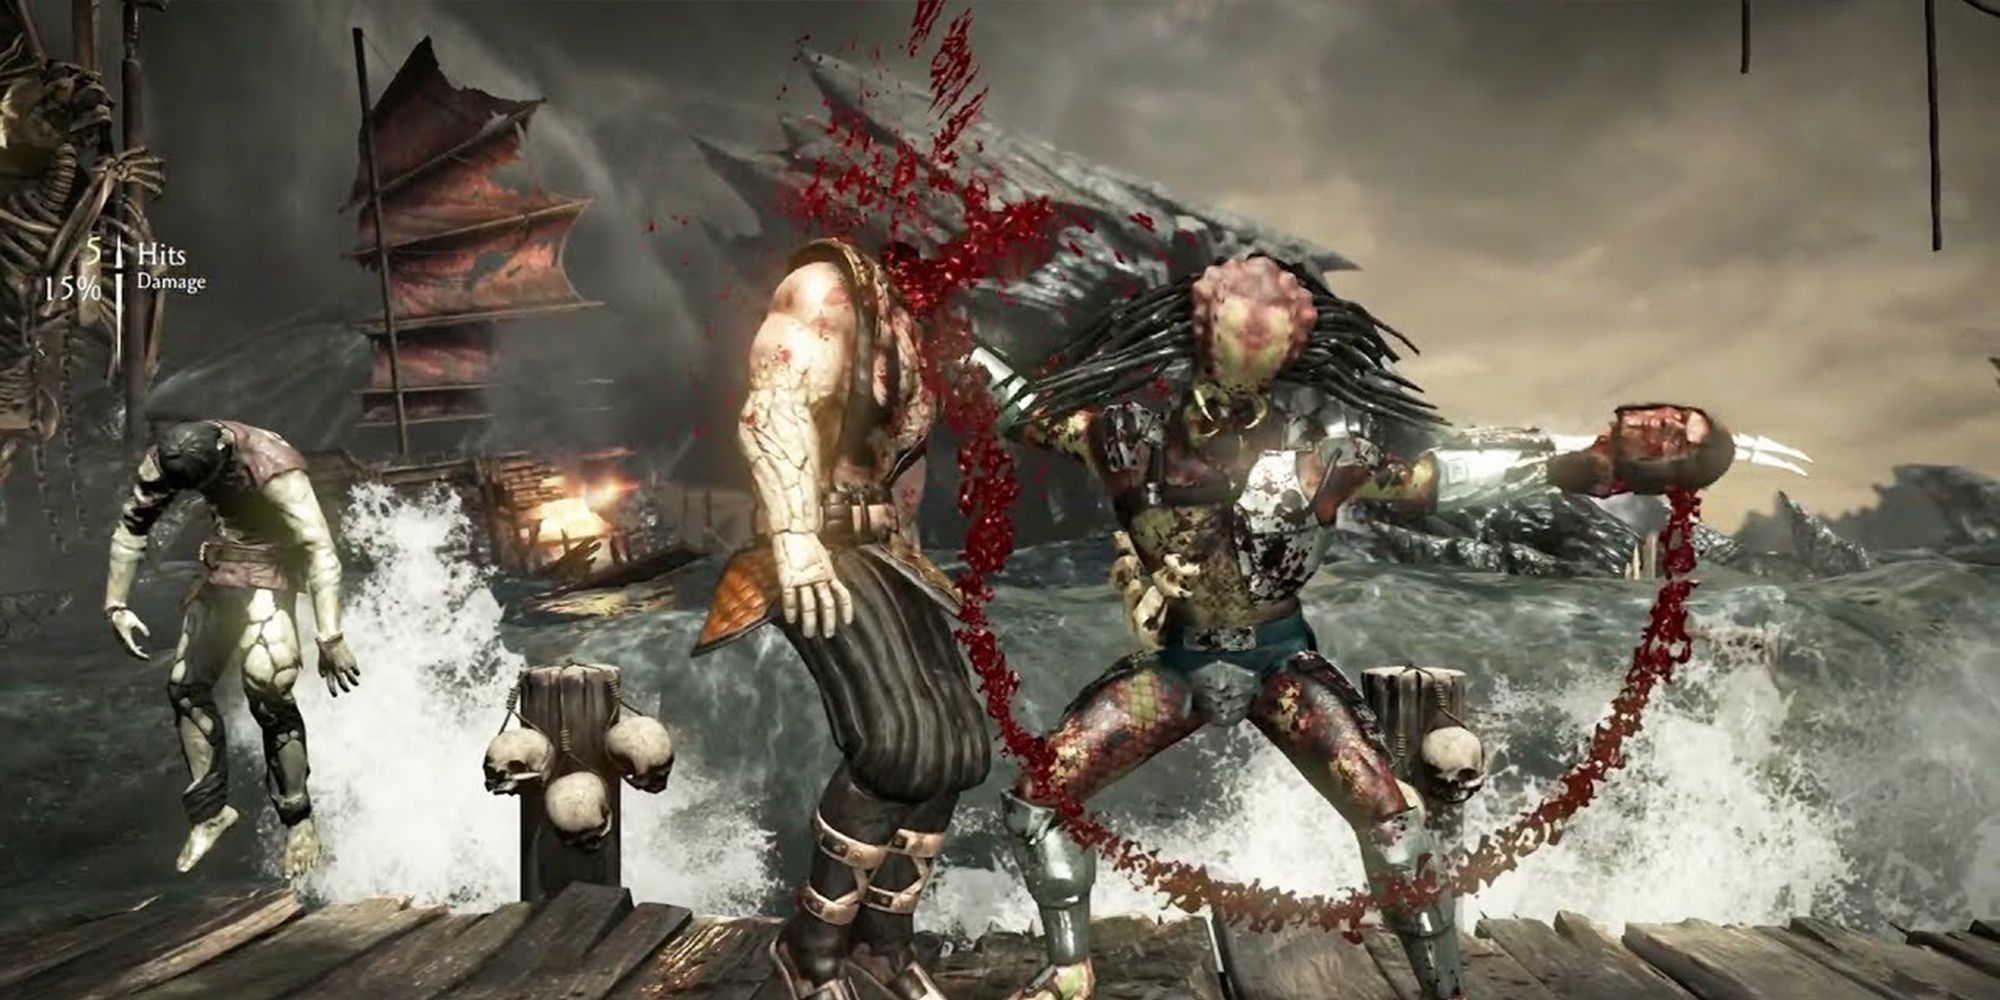 How to Perform the New Fatalities and Brutalities in 'Mortal